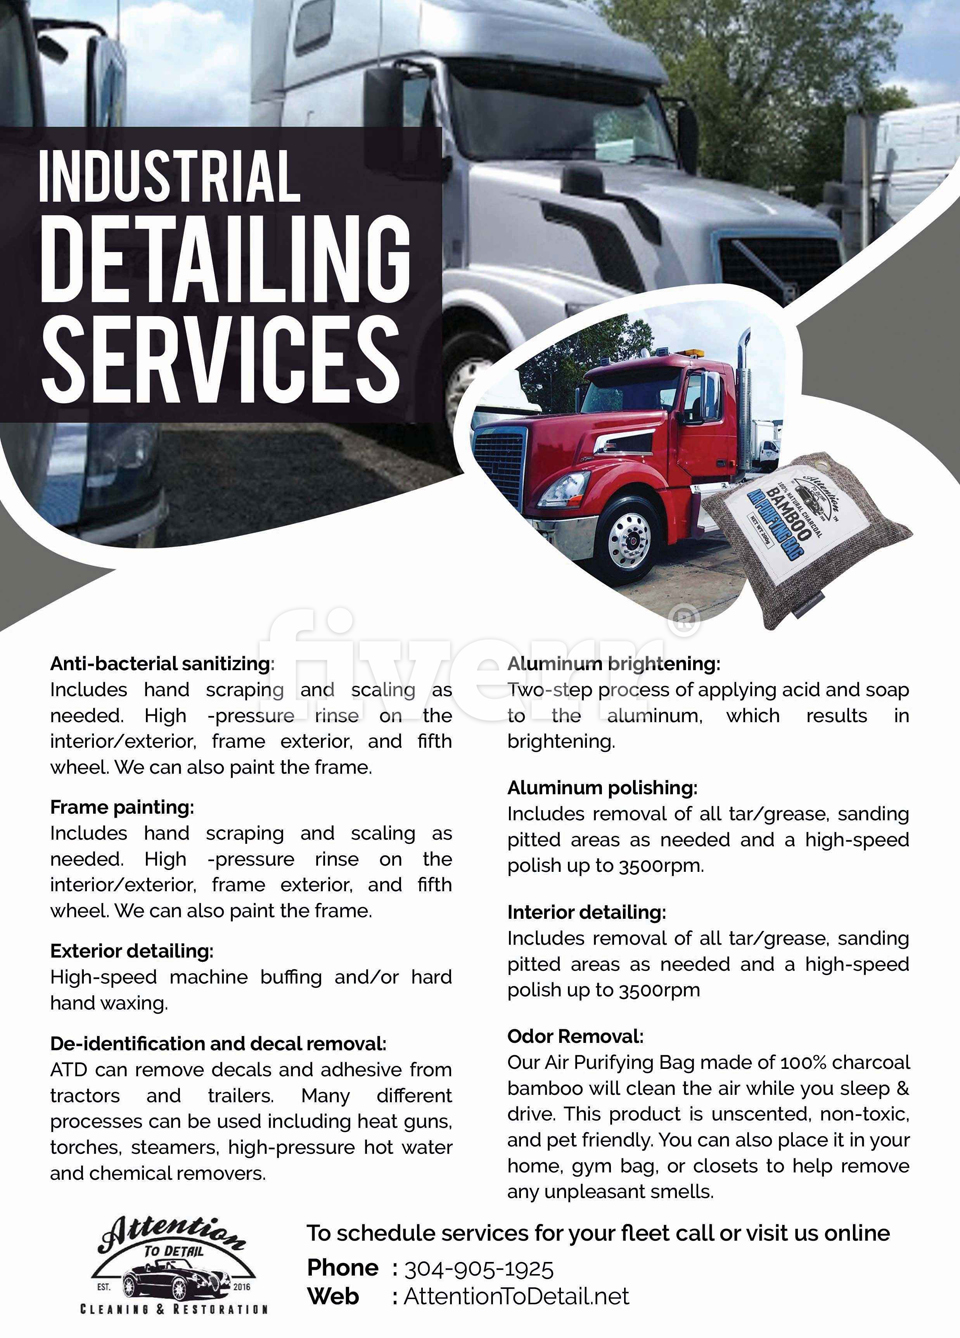 Semi Truck Detailing Supplies: Which Ones Really Work